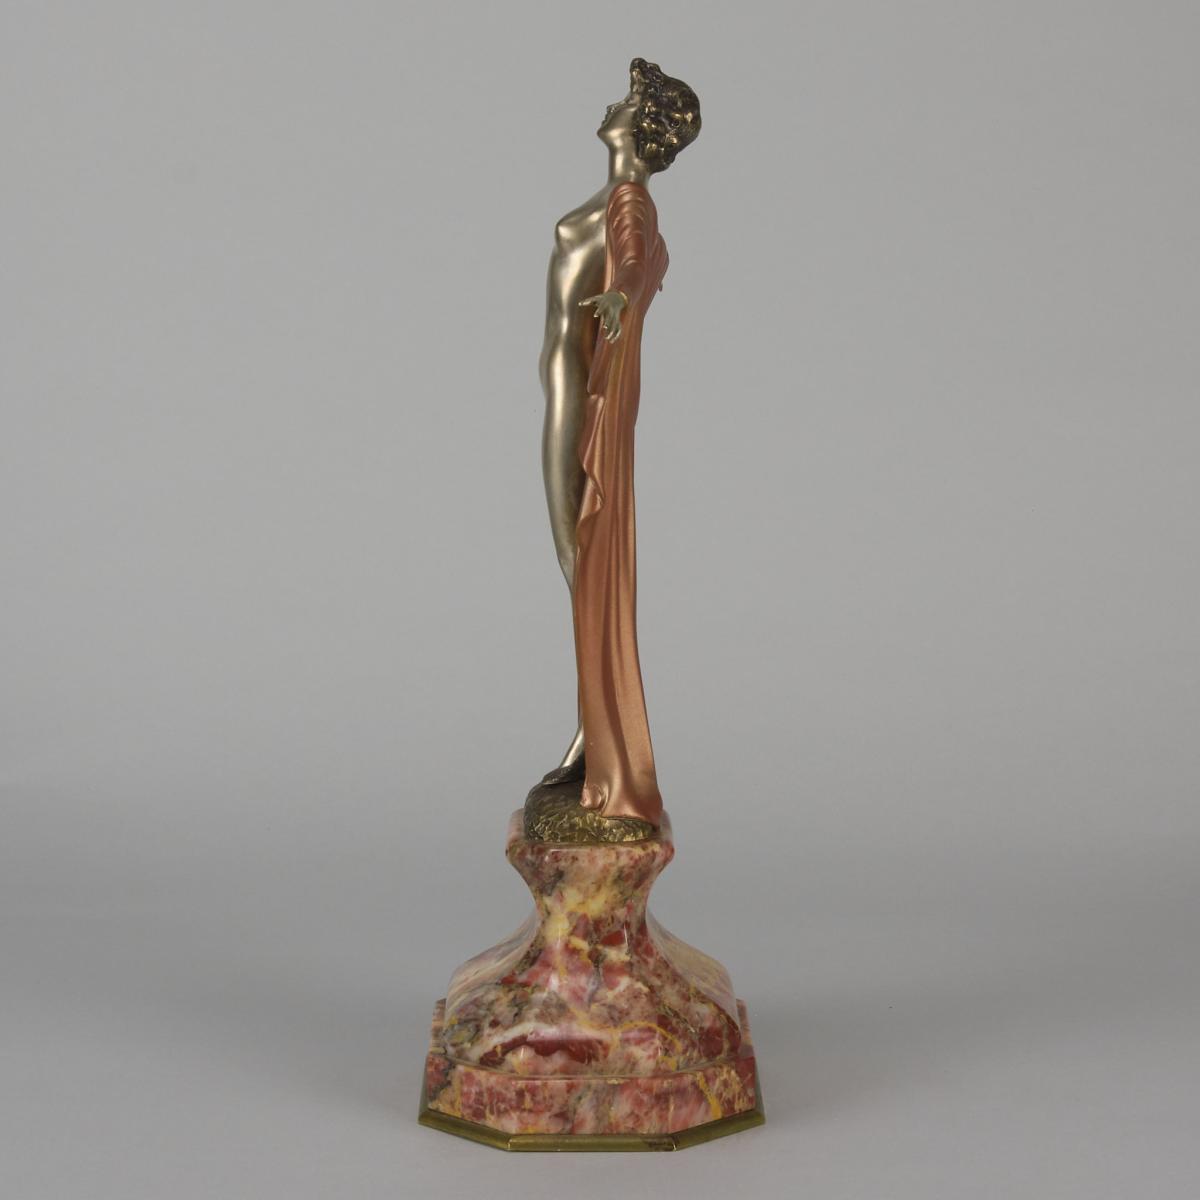 Art Deco Cold Painted Bronze Study Entitled "Spring Awakening" by Ferdinand Preiss